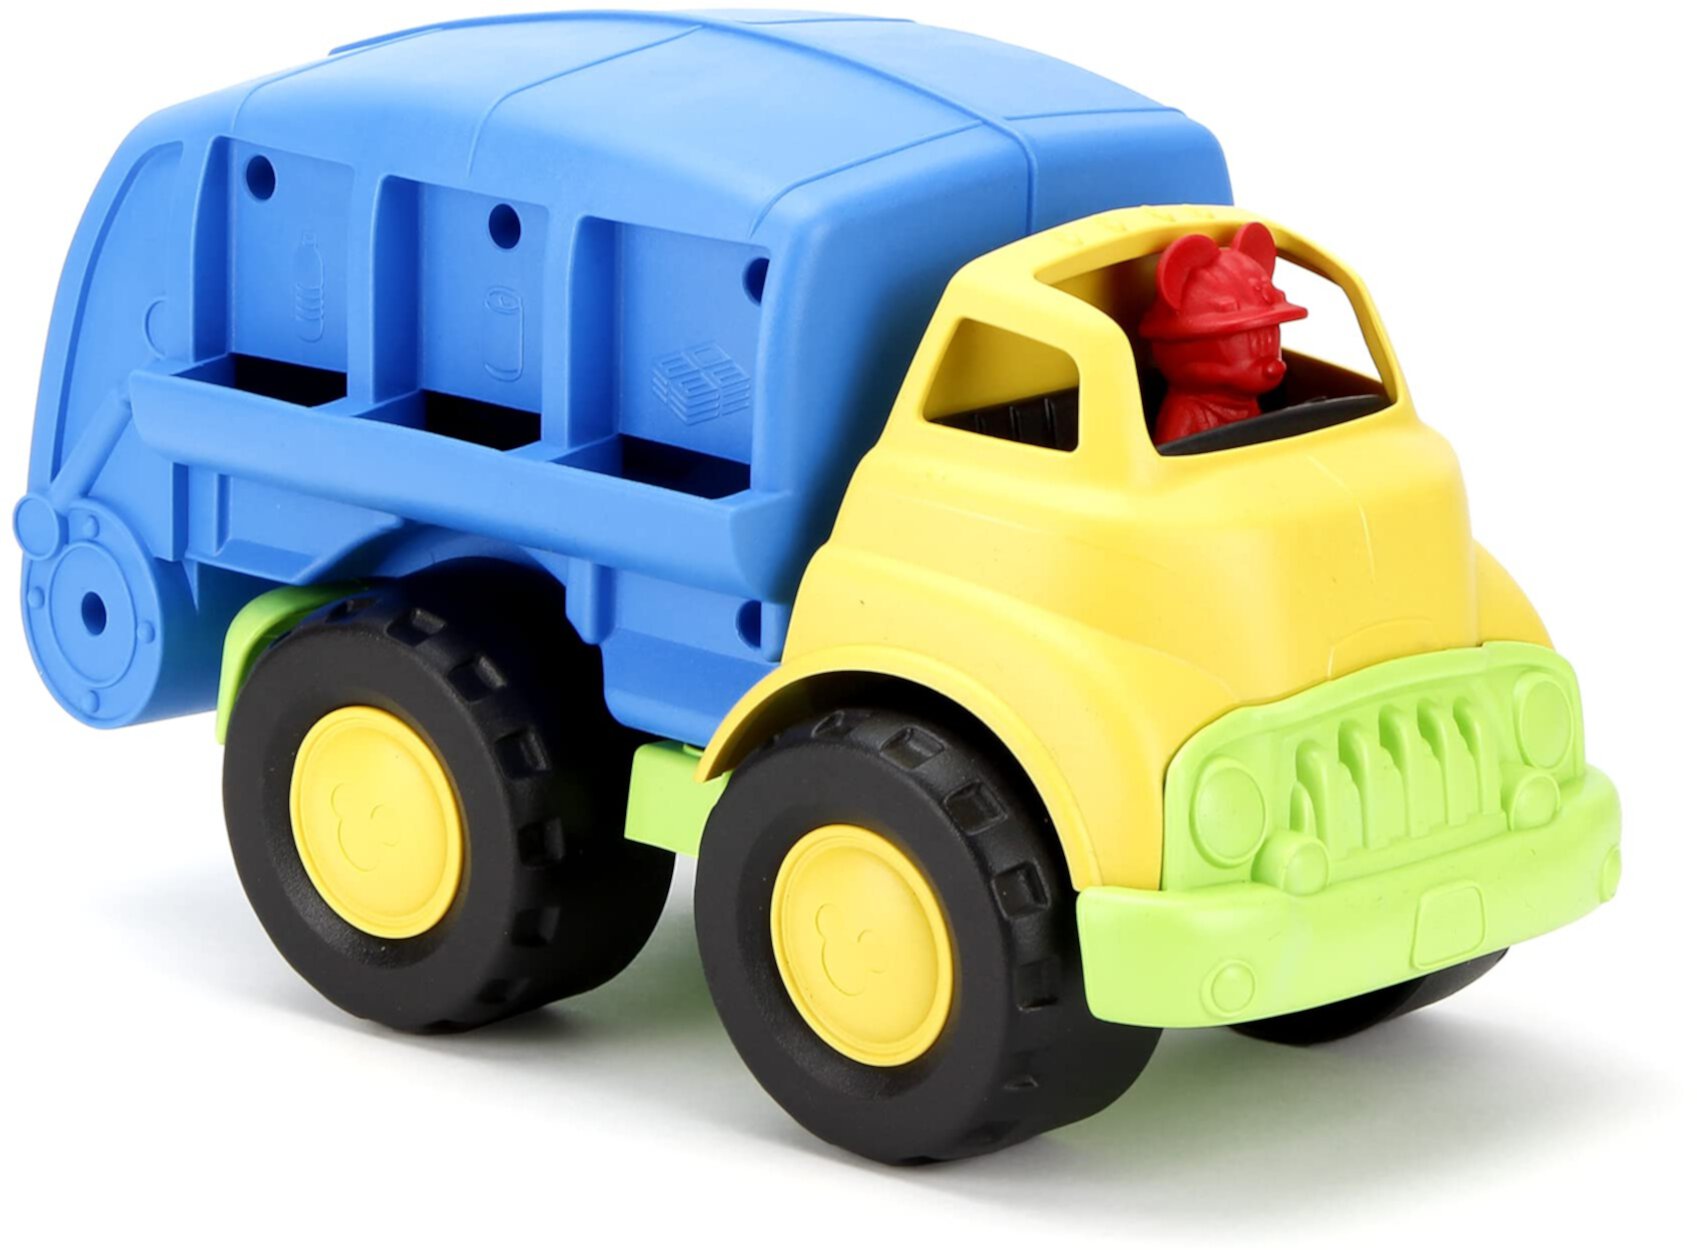 Green Toys Disney Baby Exclusive Mickey Mouse Recycling Truck, Blue - Pretend Play, Motor Skills, Kids Toy Vehicle. No BPA, phthalates, PVC. Dishwasher Safe, Recycled Plastic, Made in USA. Green Toys